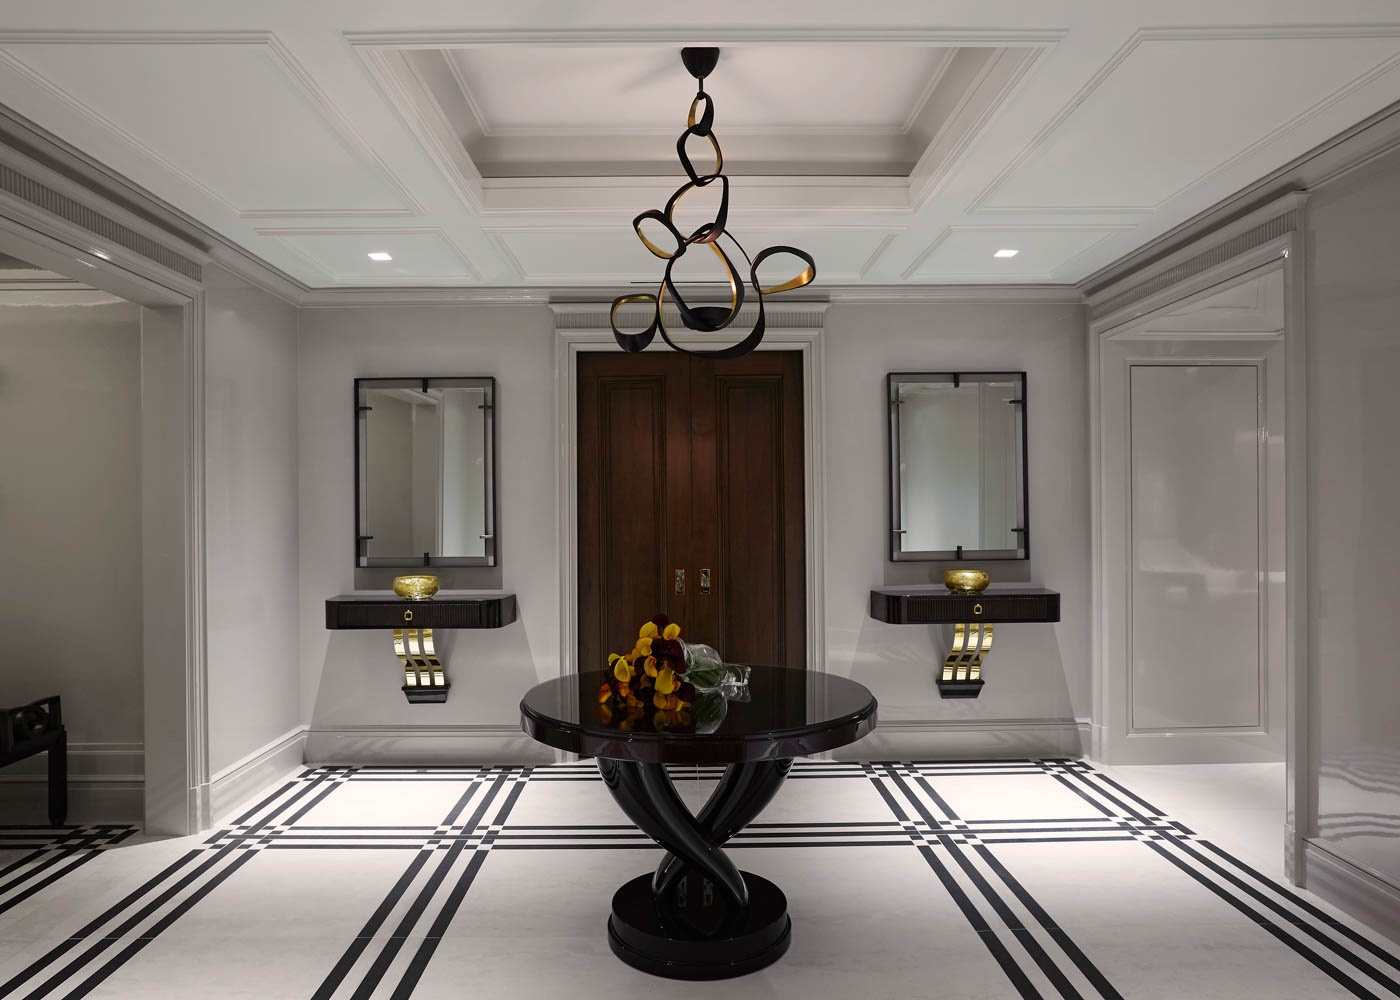 Marble with black stripes in the dinning room